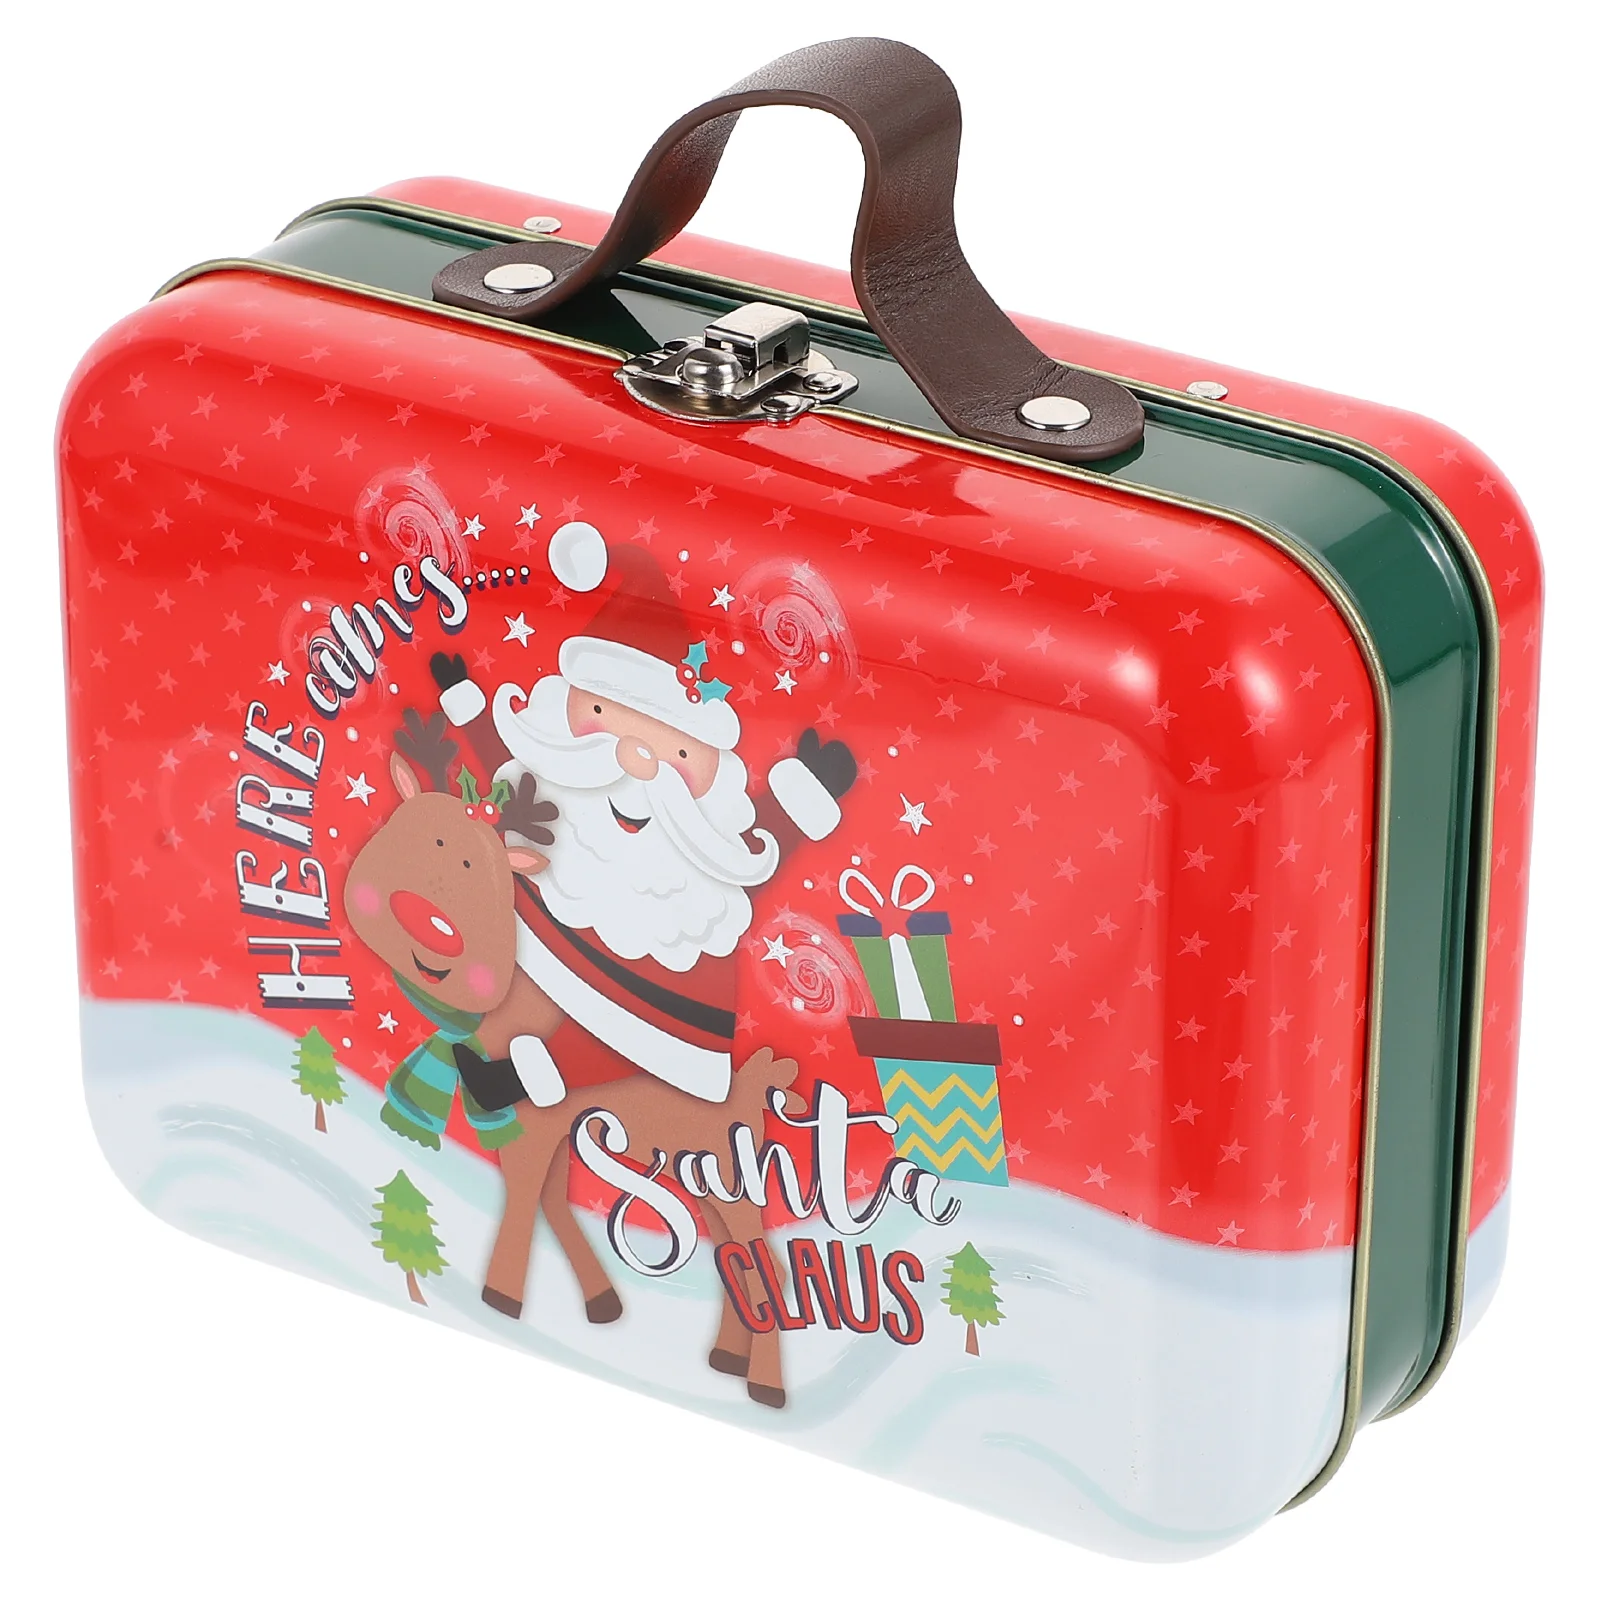 

Cookie Christmas Tins Gift Box Candy Jar Tinlid Giving Tinplate Boxes Xmas Forempty Storage Metal Biscuit Round Can Claus Treats